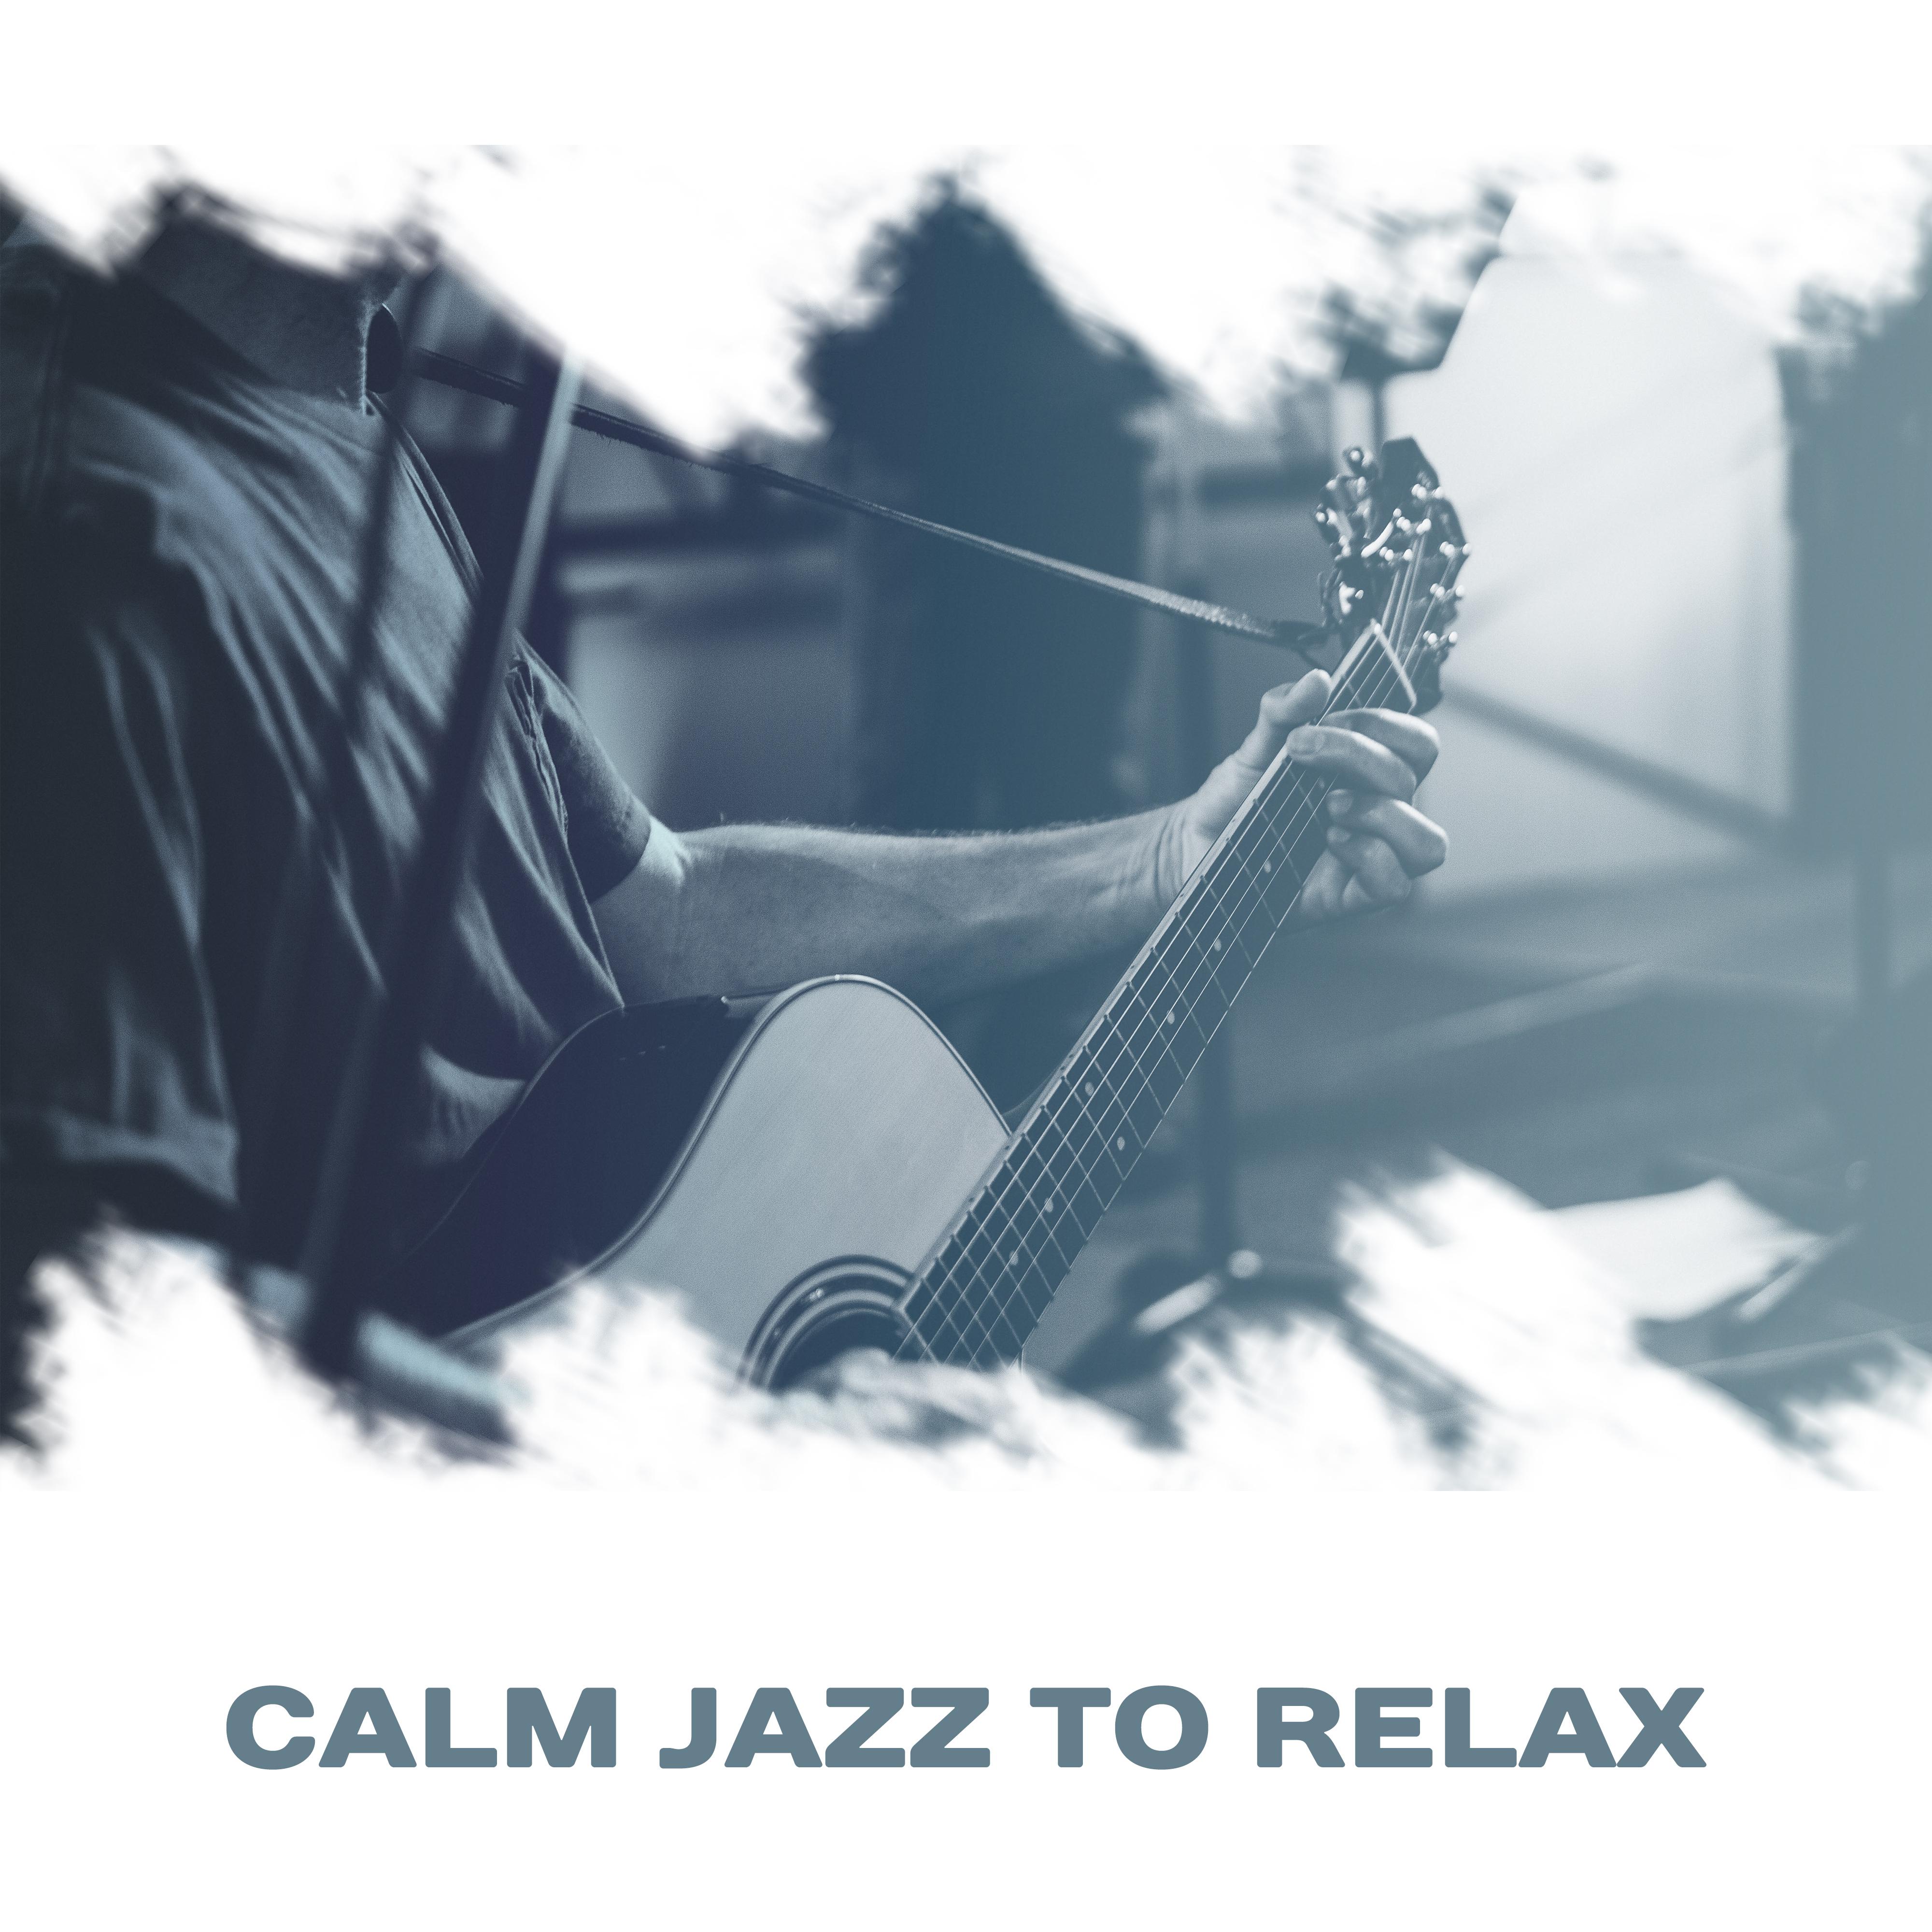 Calm Jazz to Relax  Easy Listening, Piano Sounds to Calm Down, Rest with Smooth Jazz, Chilled Note